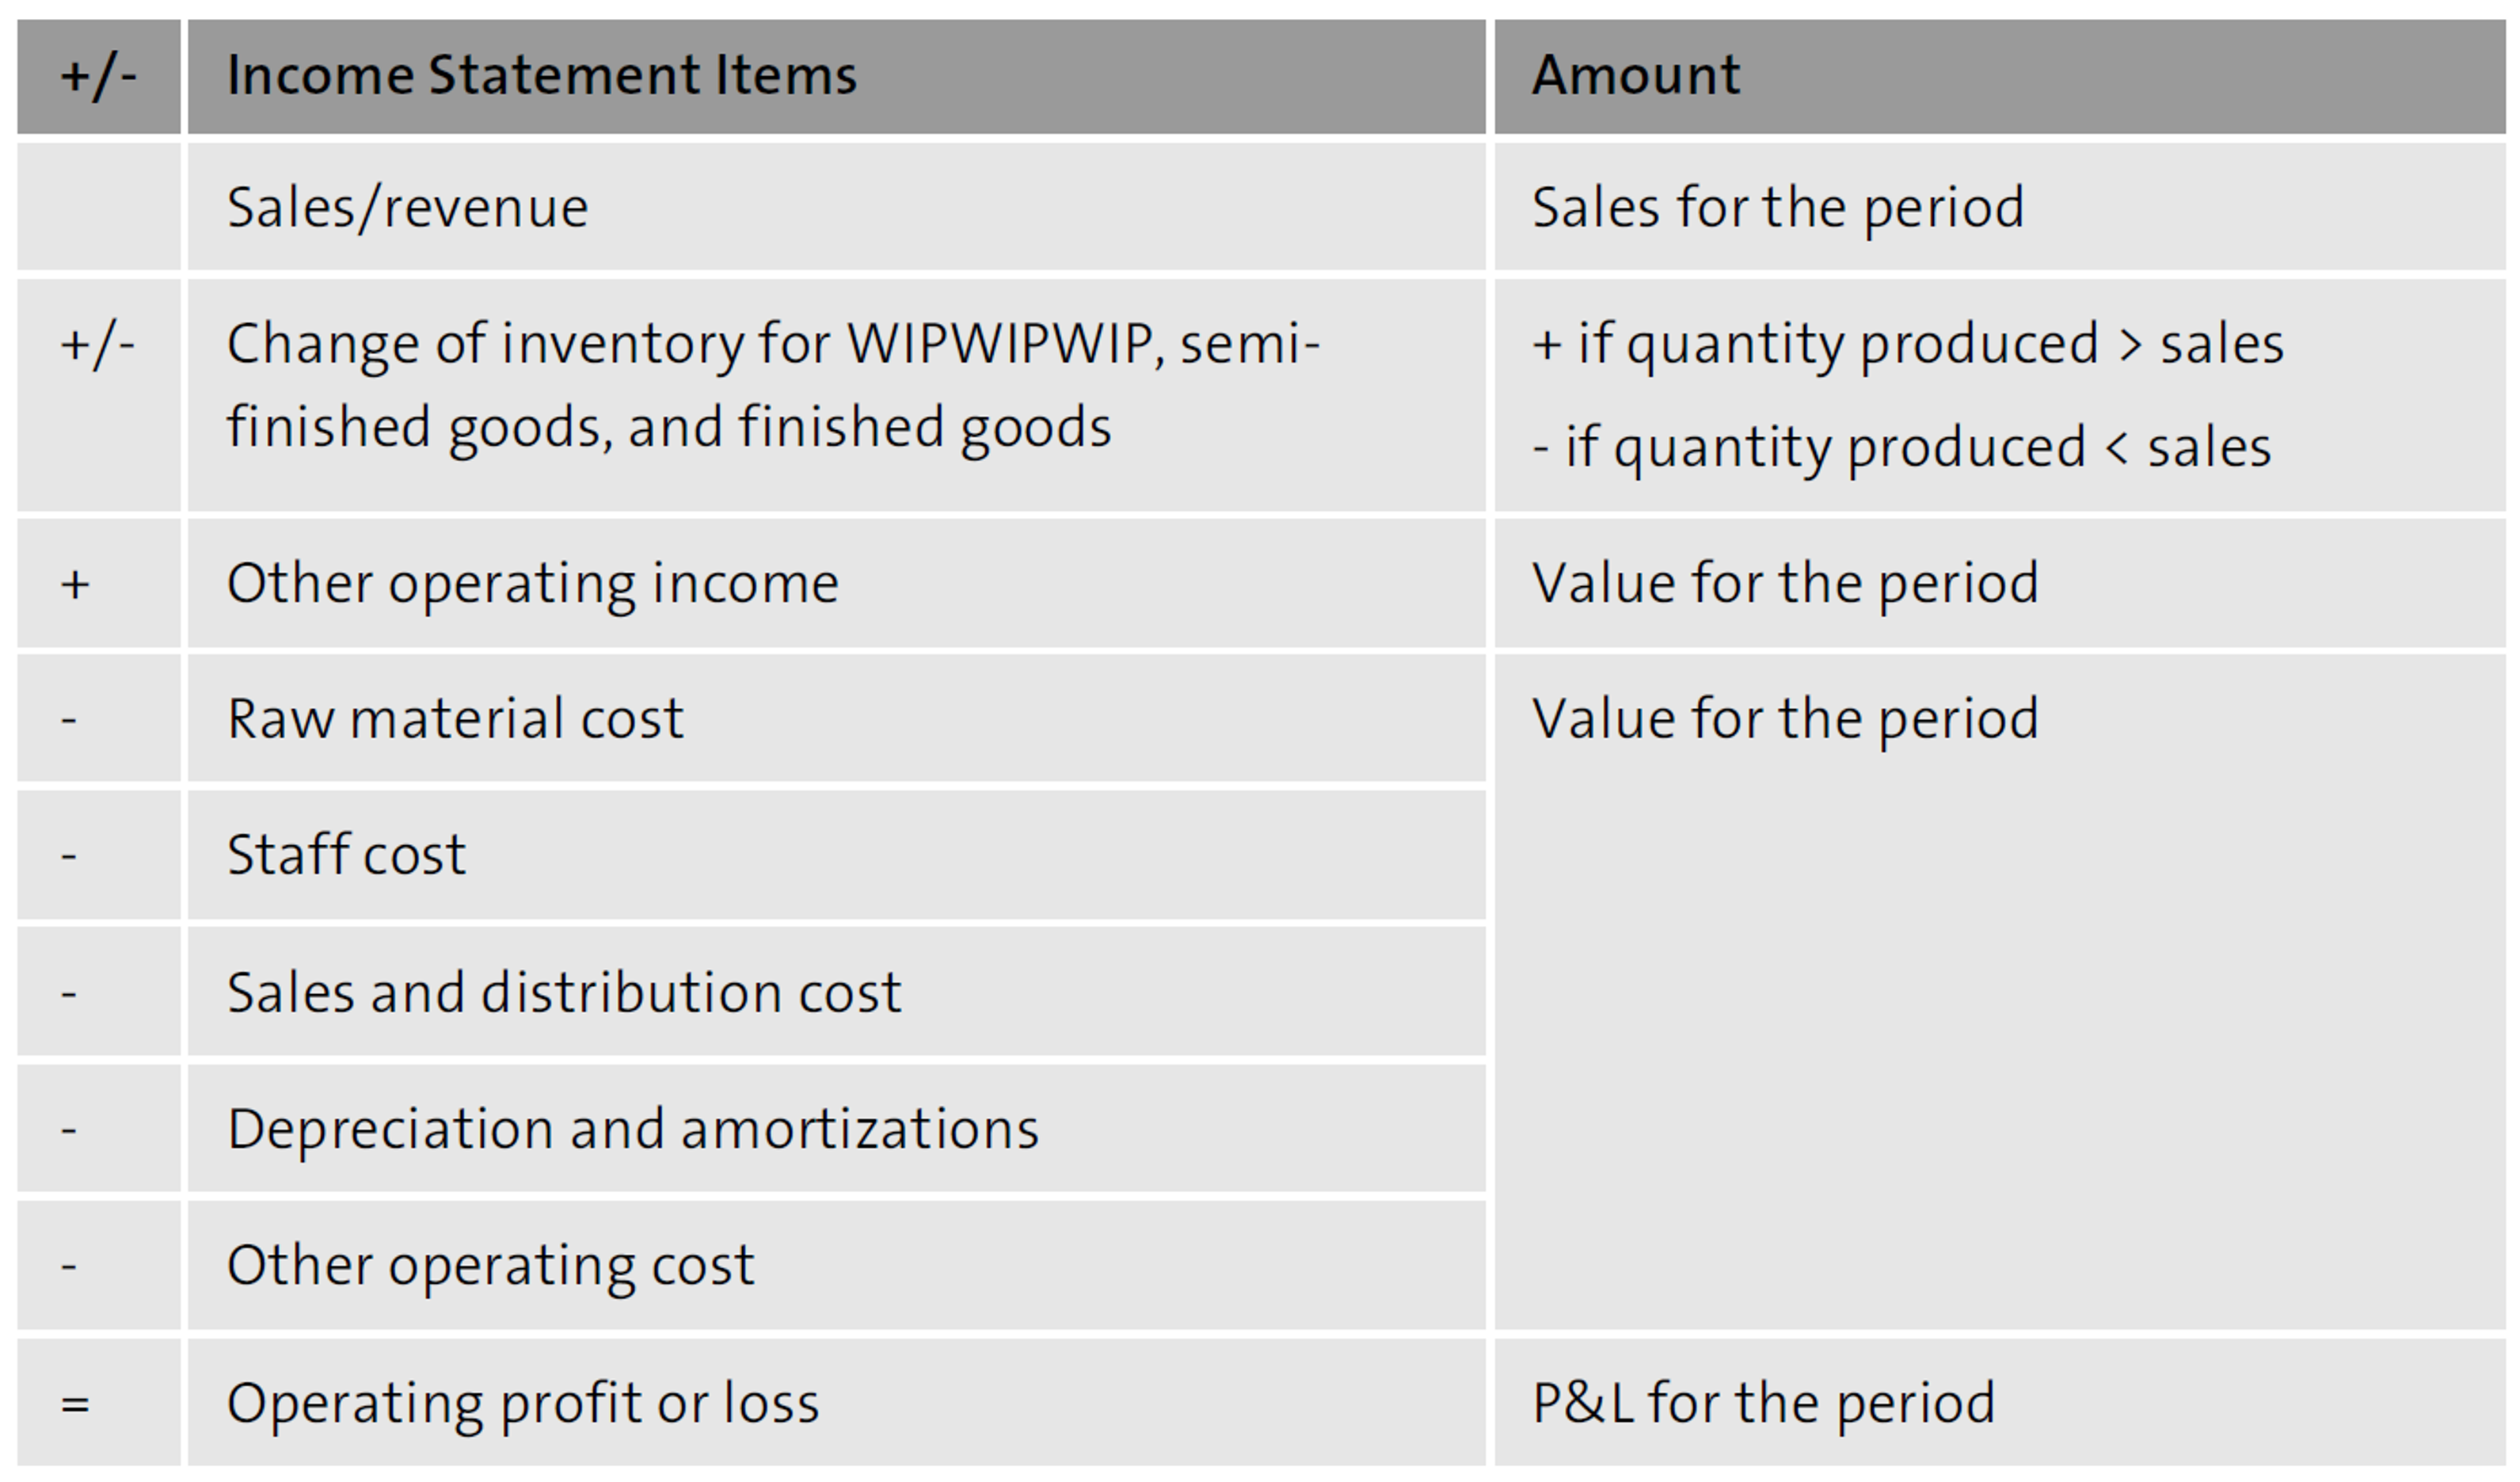 Income Statement under the Period Accounting Method